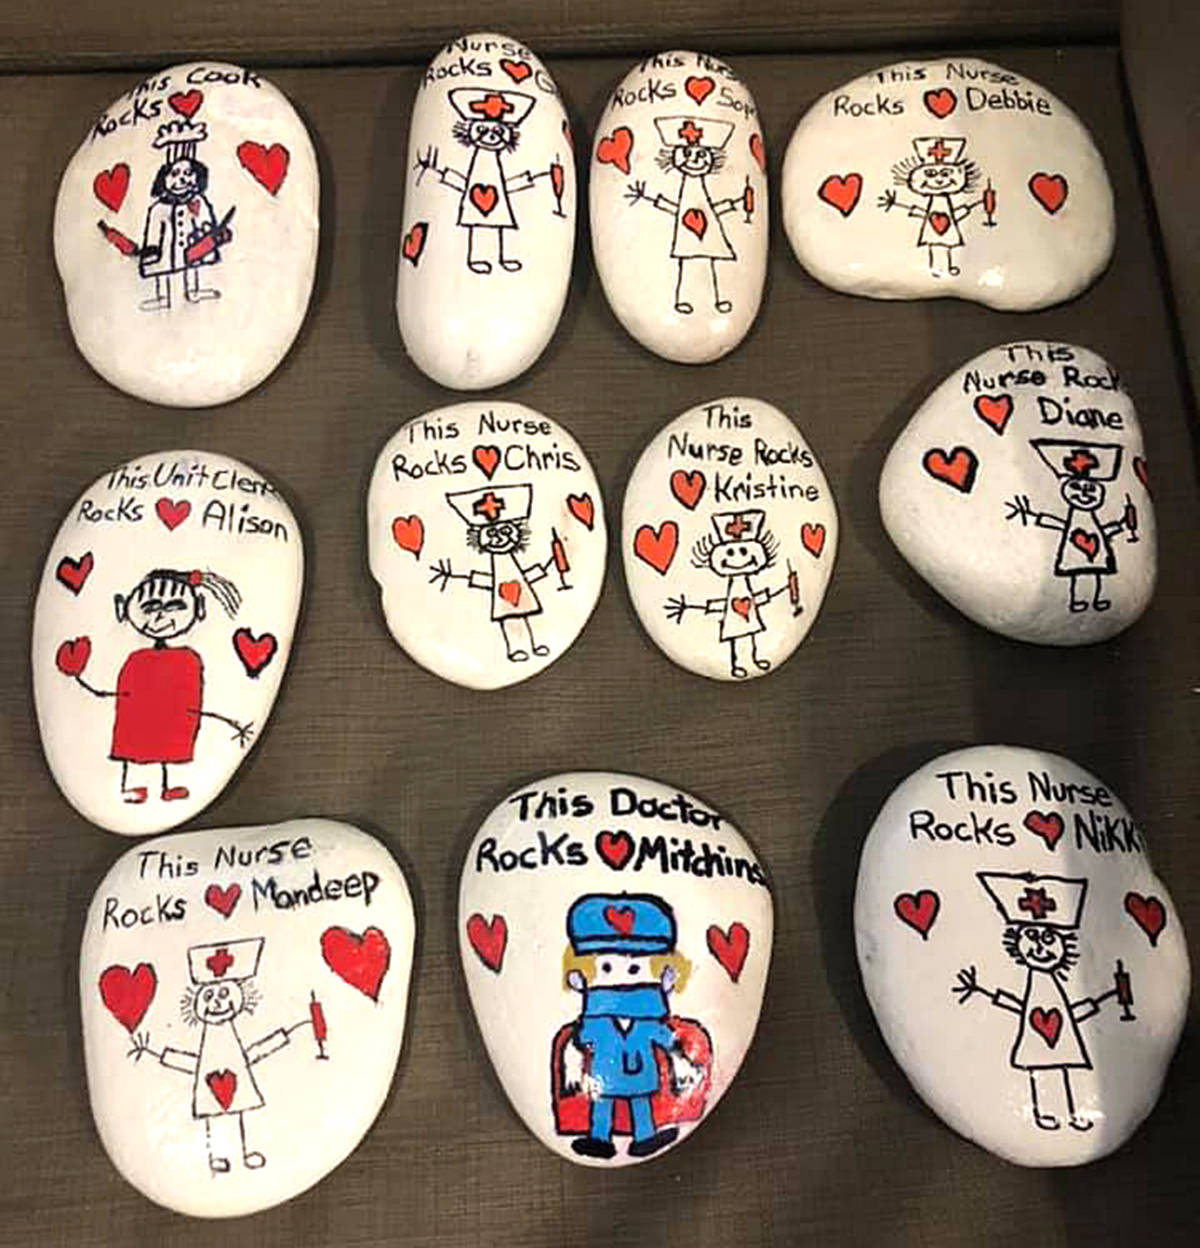 22049672_web1_200709-ABB-Painted-rock-messages_4